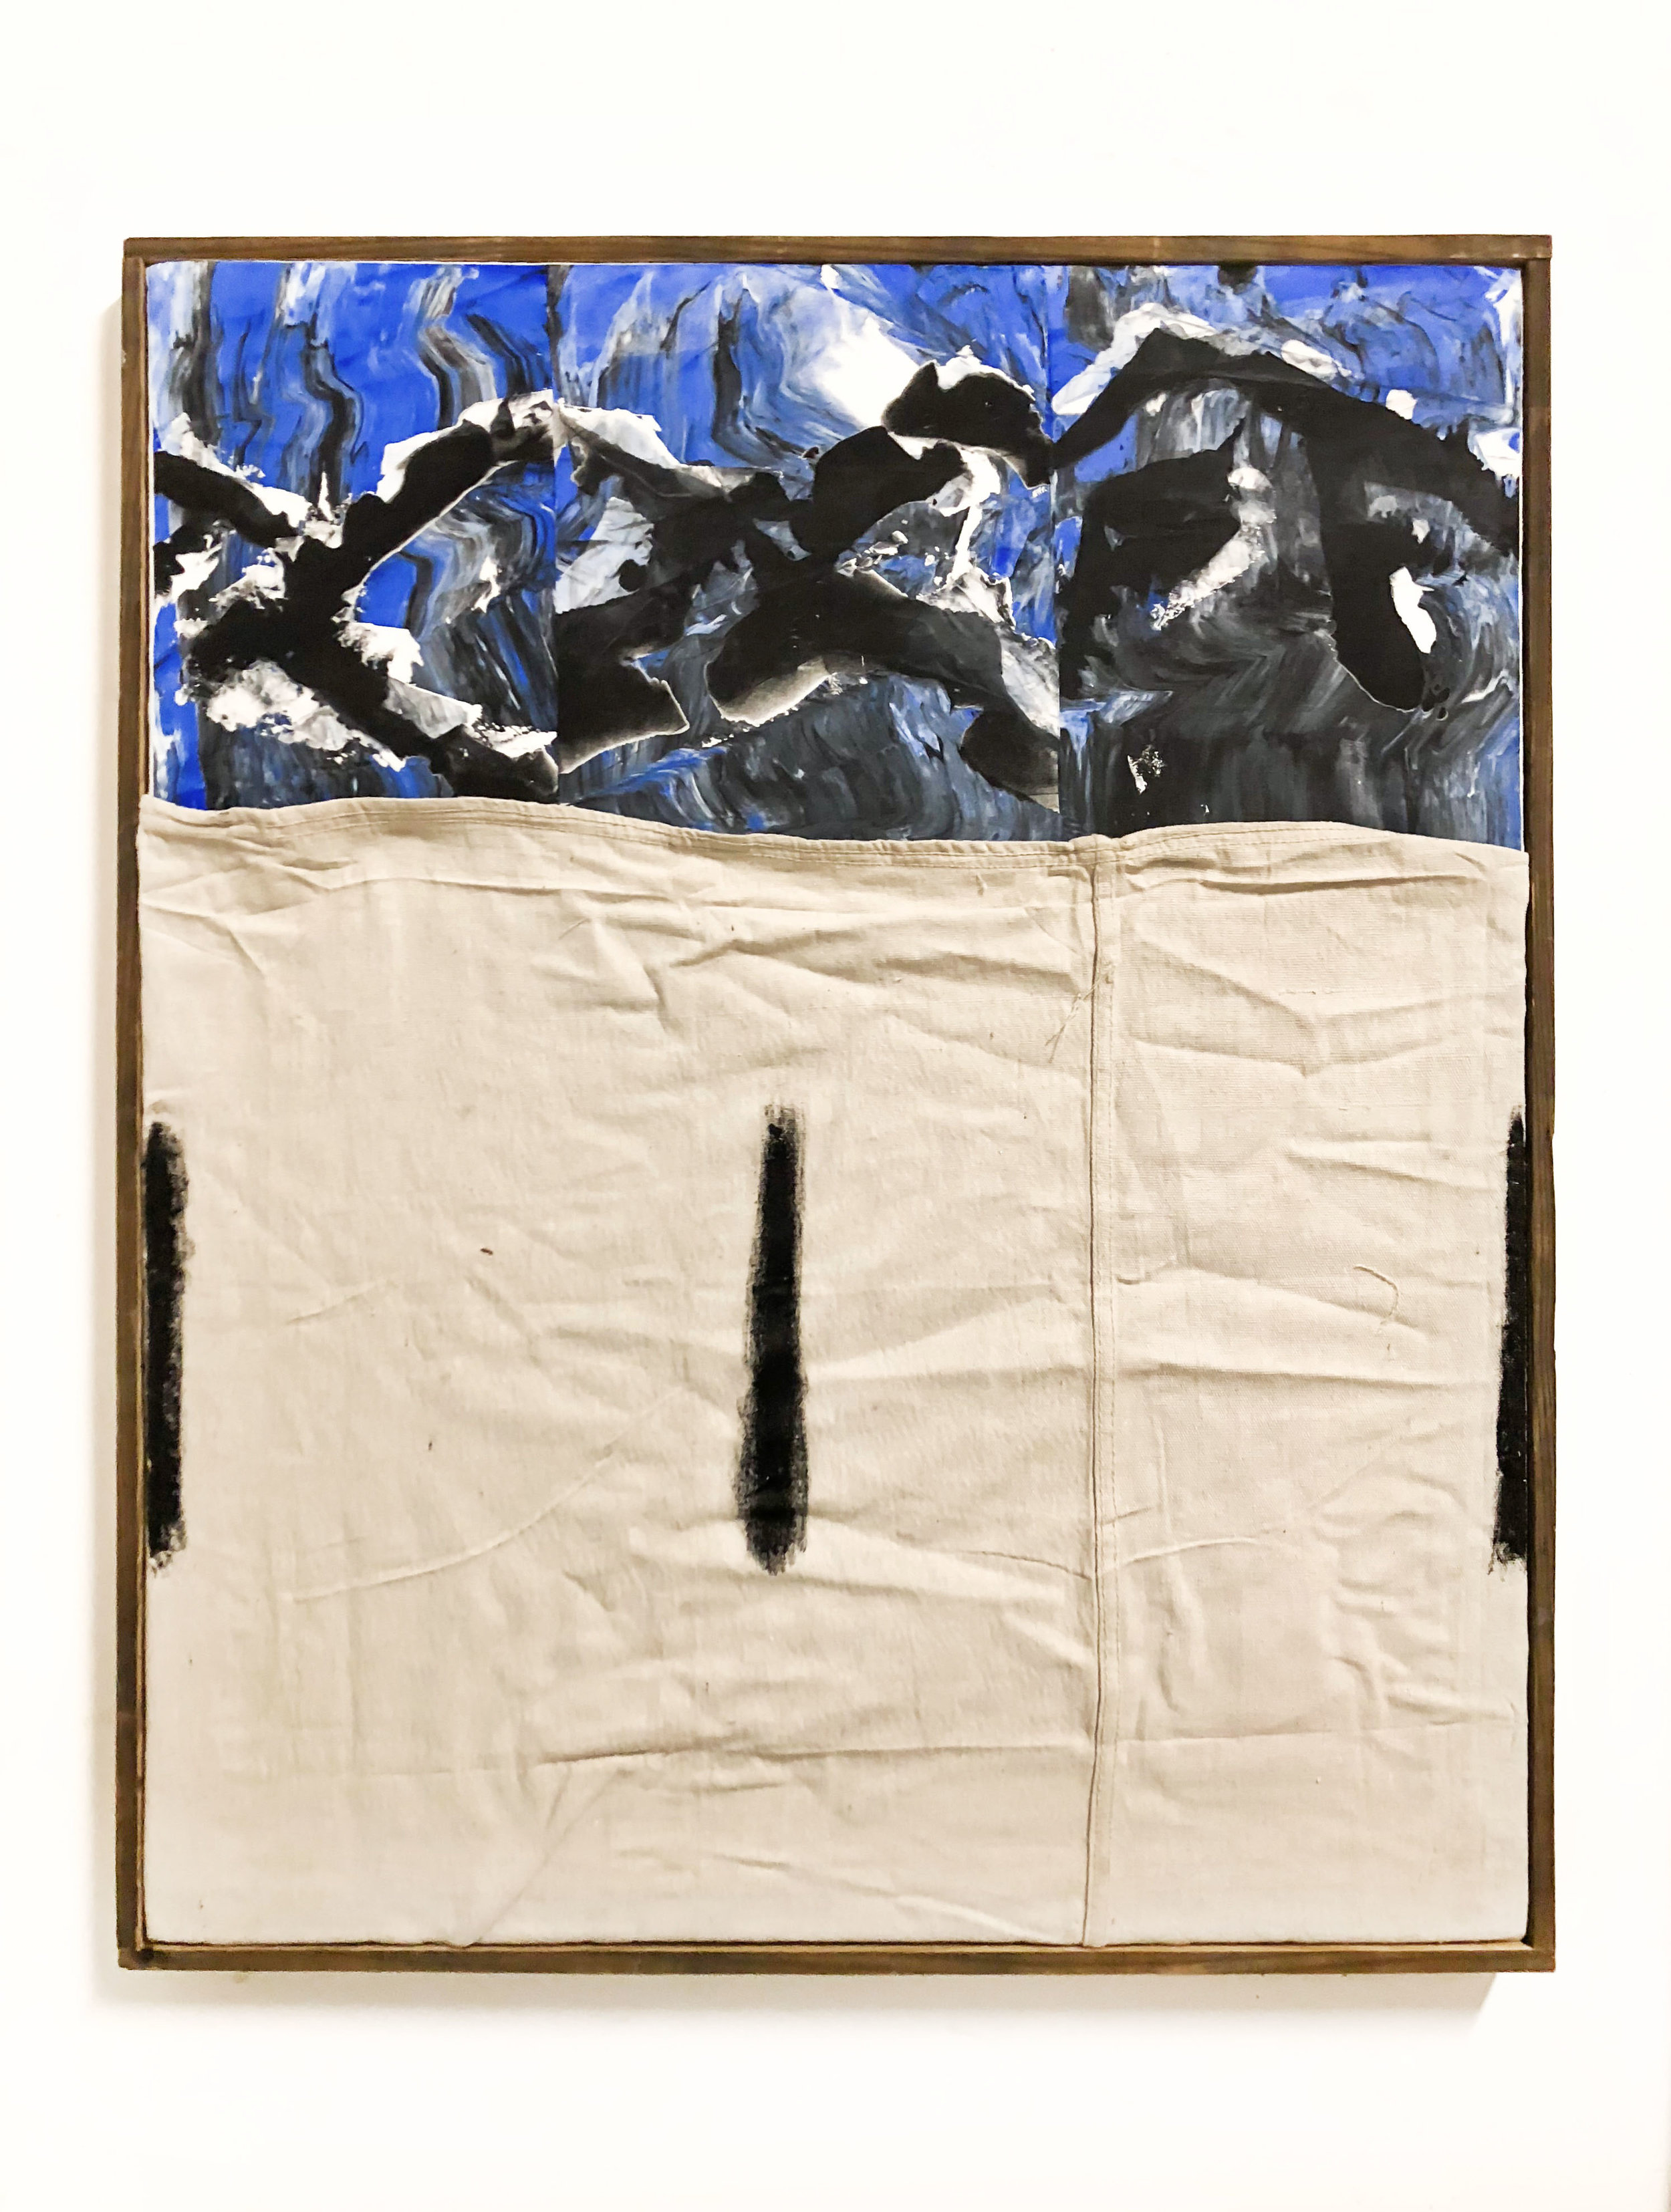 SHIV'AH5 (שבעה), gesso, oil stick and ink with sand from the West Bank and Israel on linen and microsuede. Stretched on silkscreen frame 36" x 30", 2017